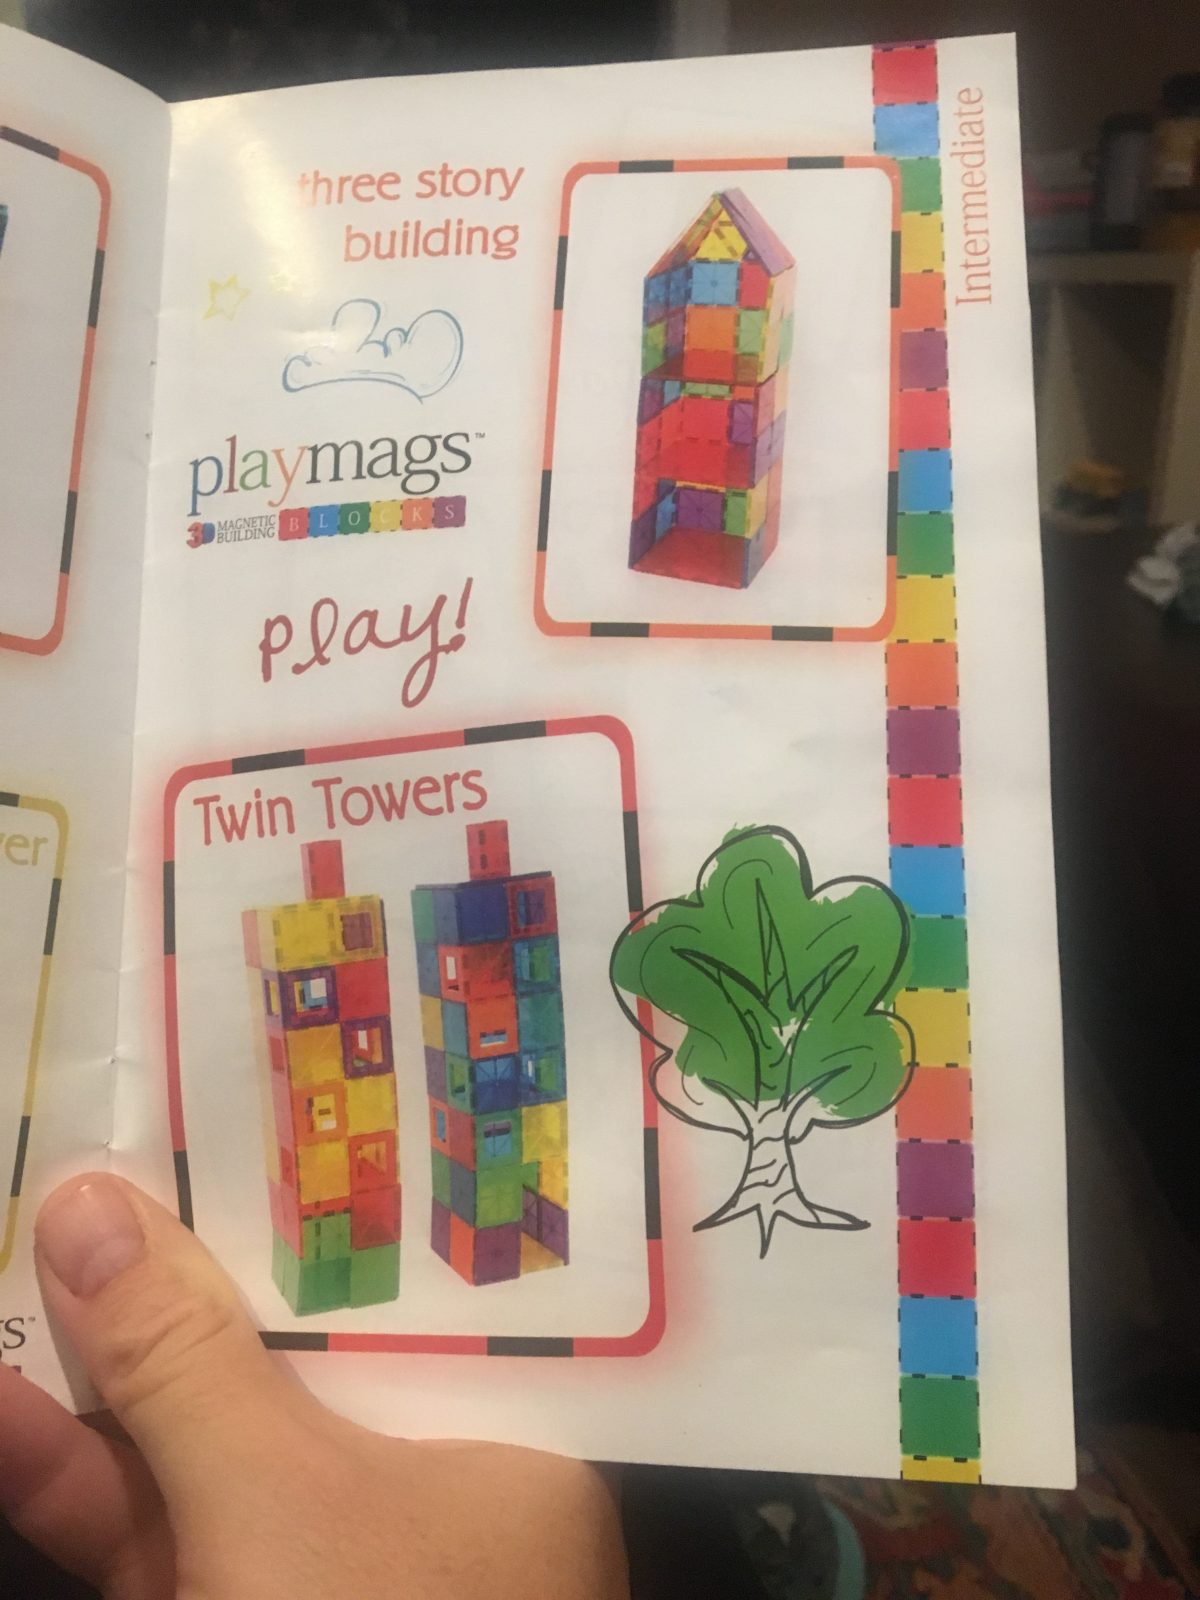 Did Playmags Mean to Include This Image in Their "Imagination" Booklet?